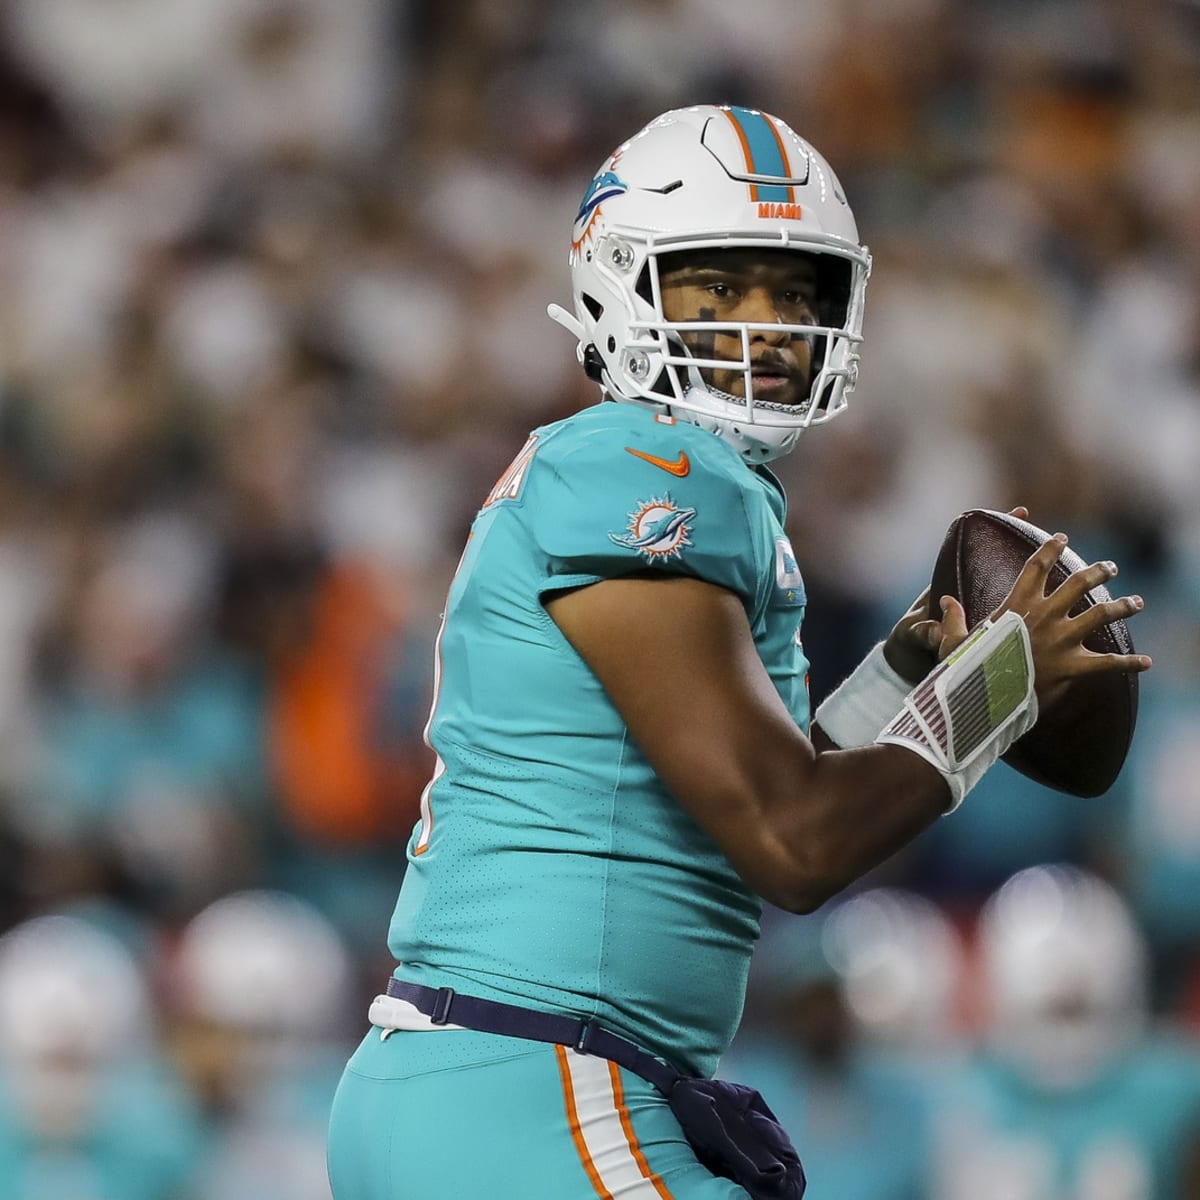 Miami Dolphins quarterback Tua Tagovailoa taken off the field on stretcher  during game against Bengals, News